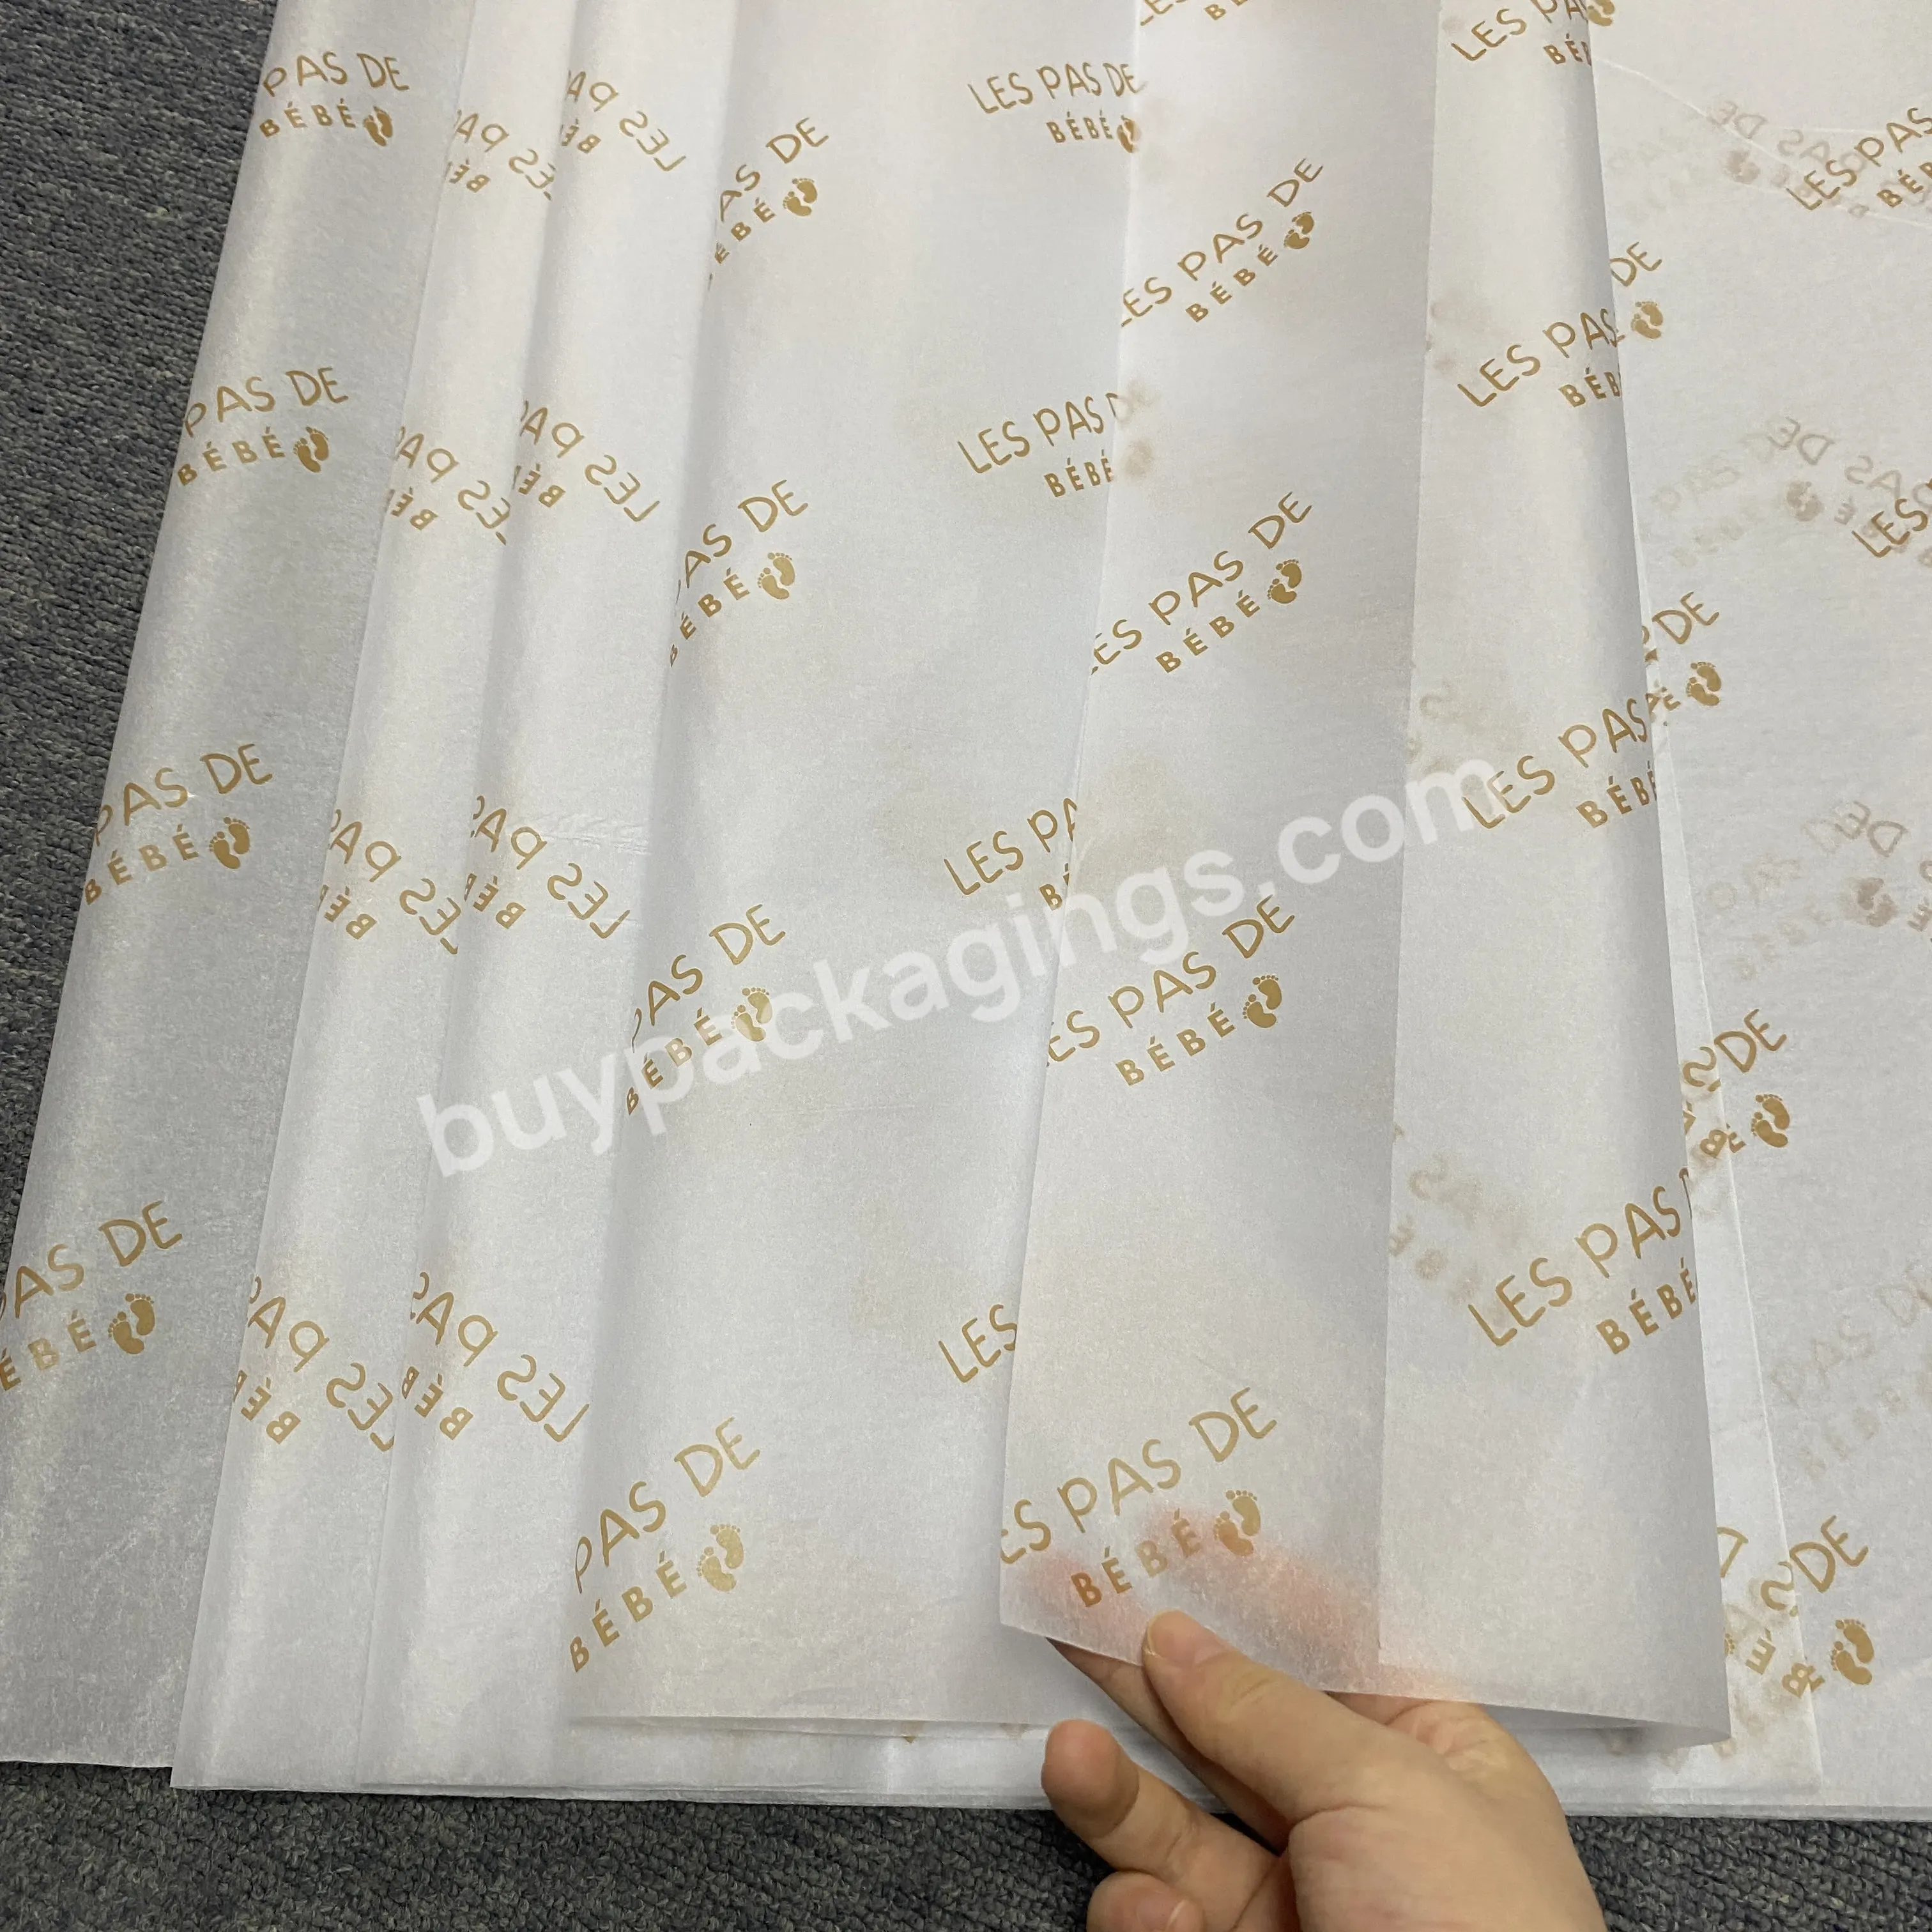 Wholesale Logo Printed 17g /30g Wrapping Paper Tissue Wrapping Papers For Gift Packing - Buy Wrapping Flowers And Clothing,Moq Is 100 Pcs,Customized Logo And Size.